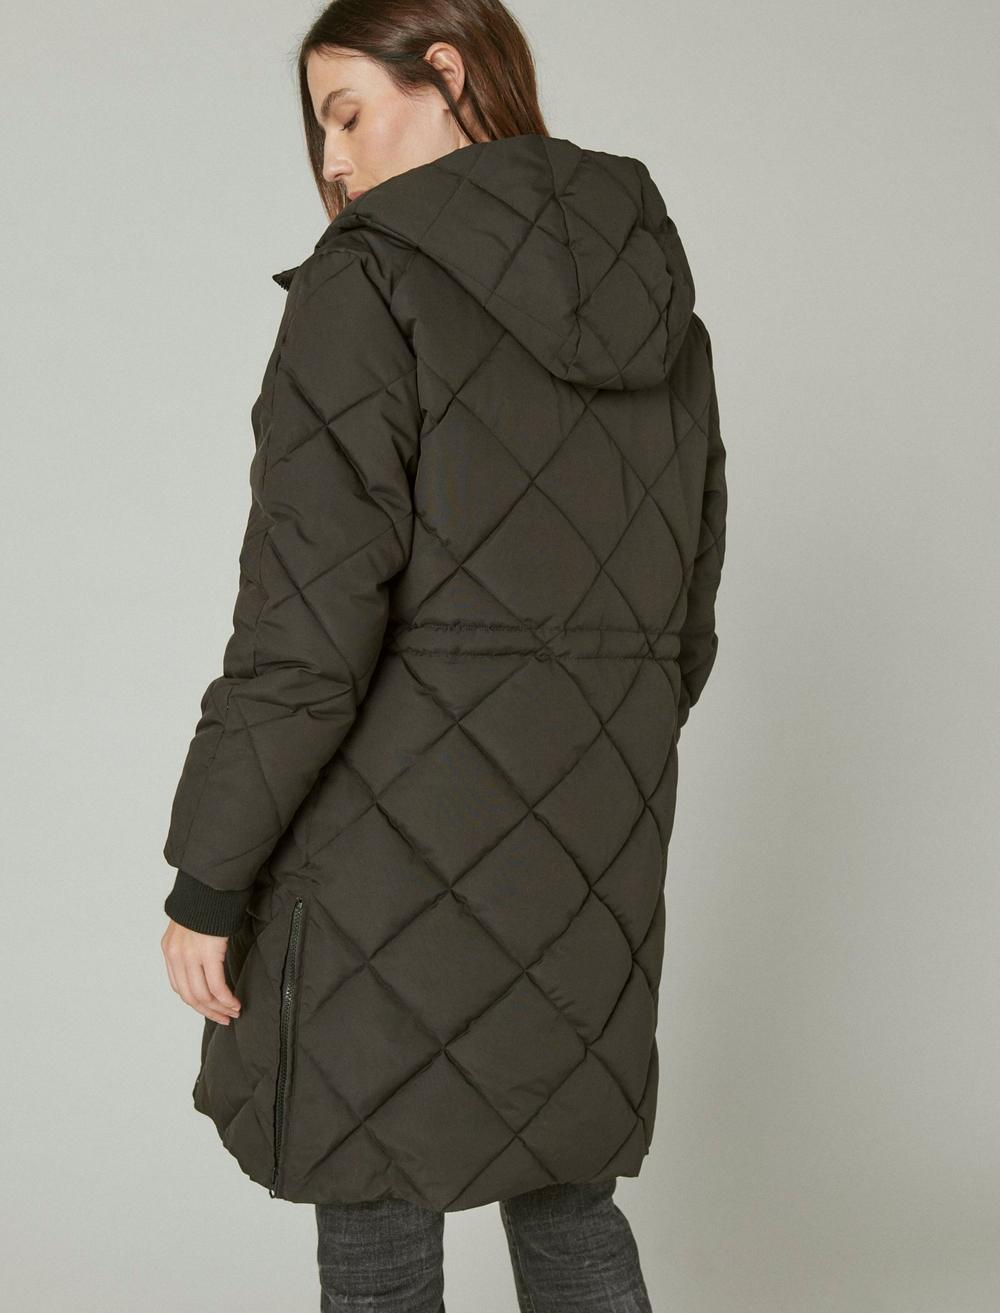 LONG LINE QUILTED PUFFER COAT, image 4